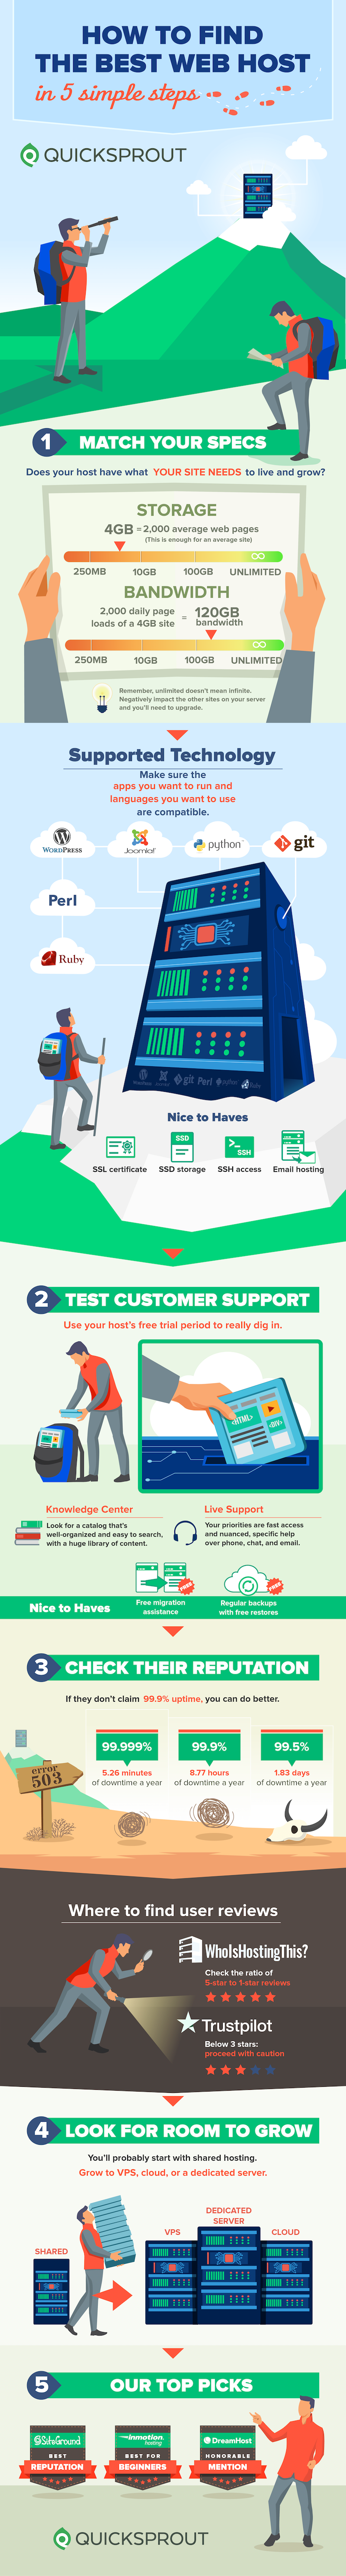 Infographic showing the five steps to finding the best web host